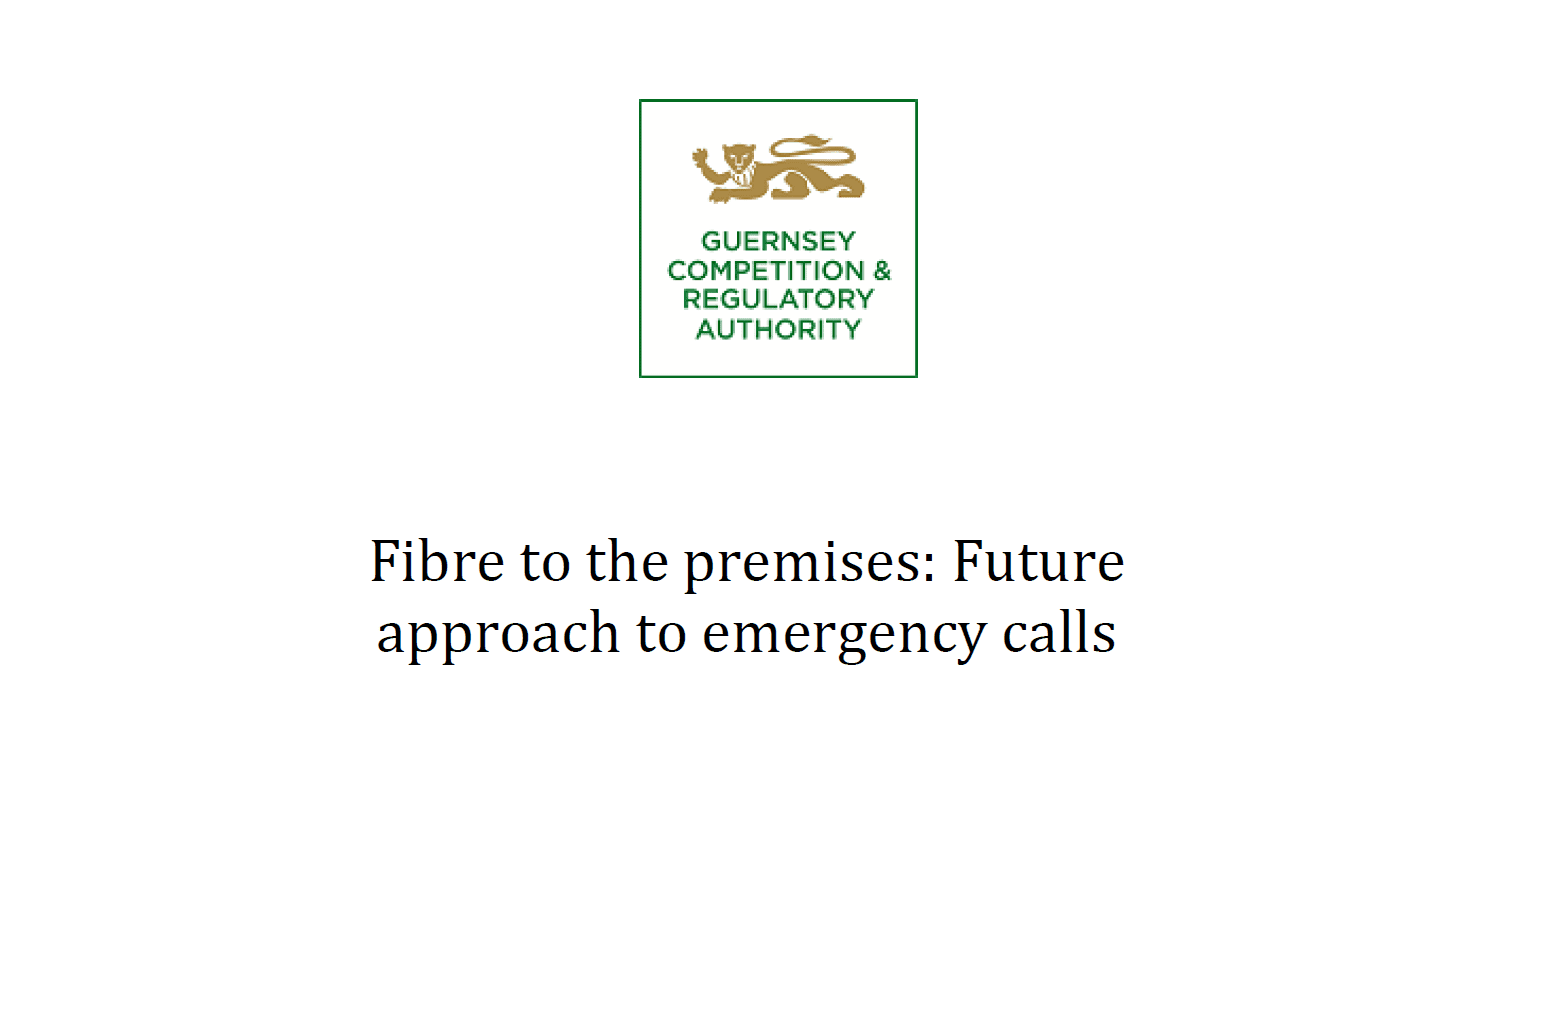 Fibre to premises call for information questions from the GRCA.